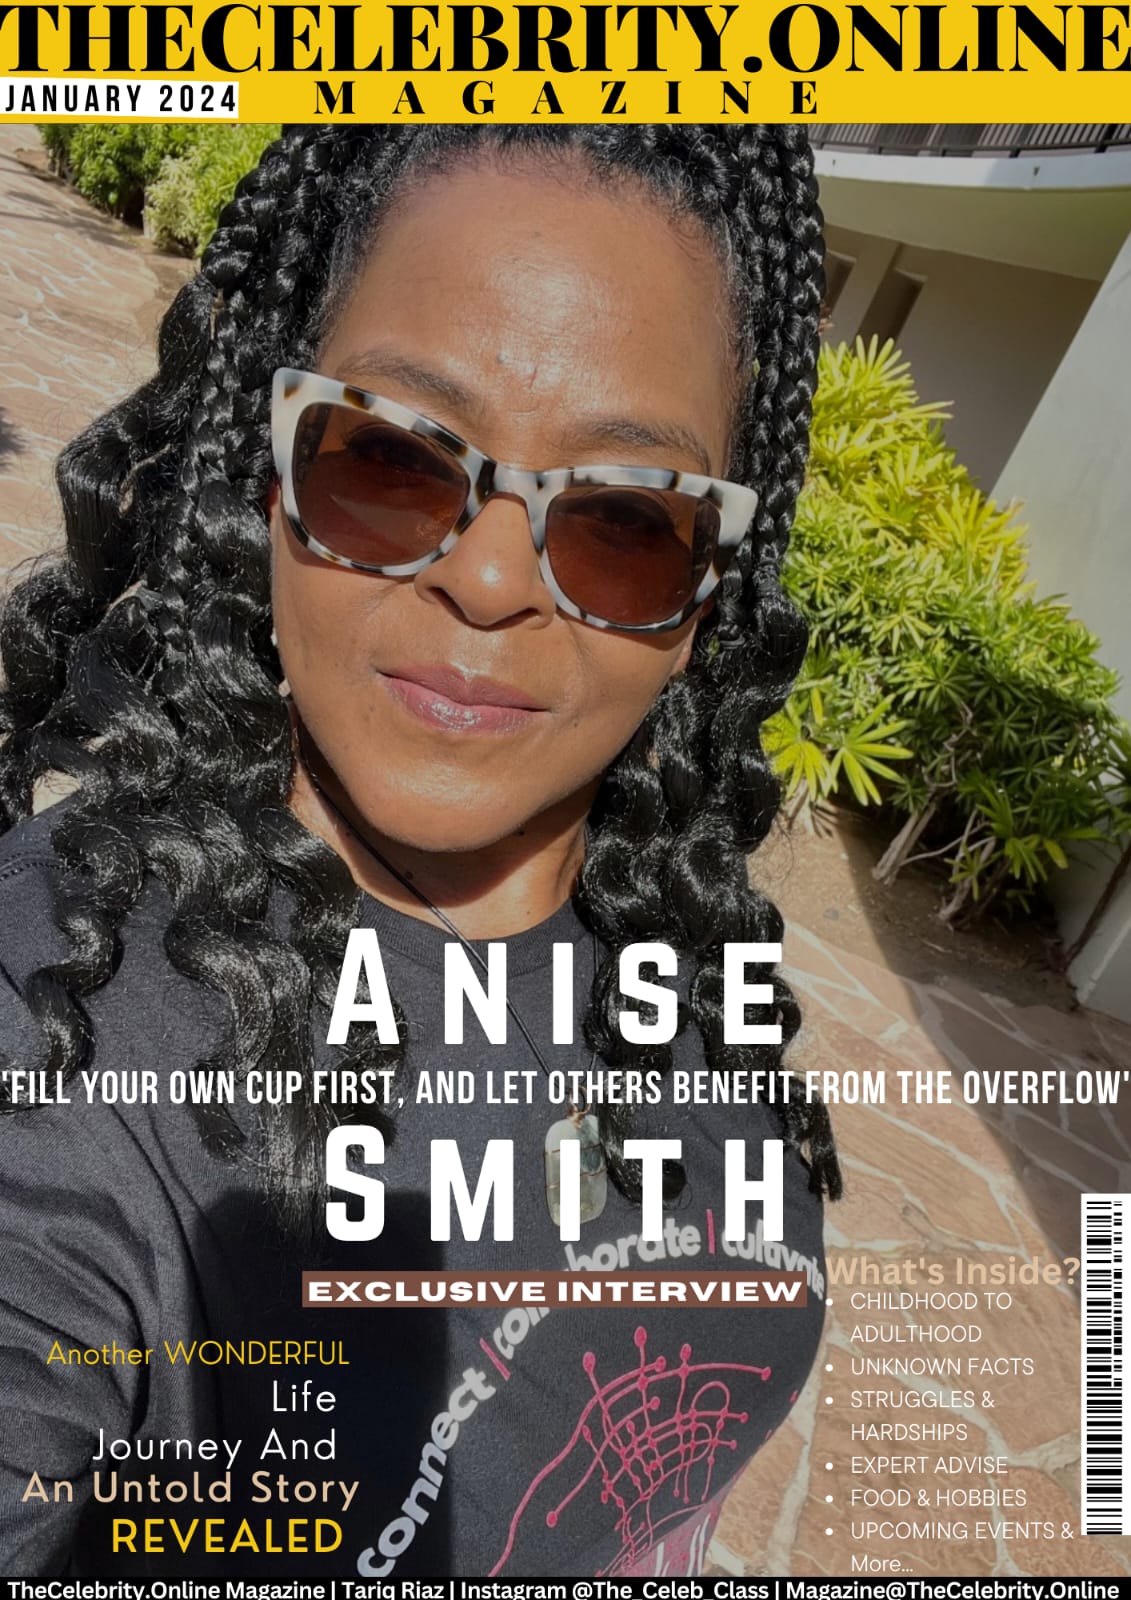 Anise Smith Exclusive Interview – ‘Fill Your Own Cup First, And Let Others Benefit From The Overflow’